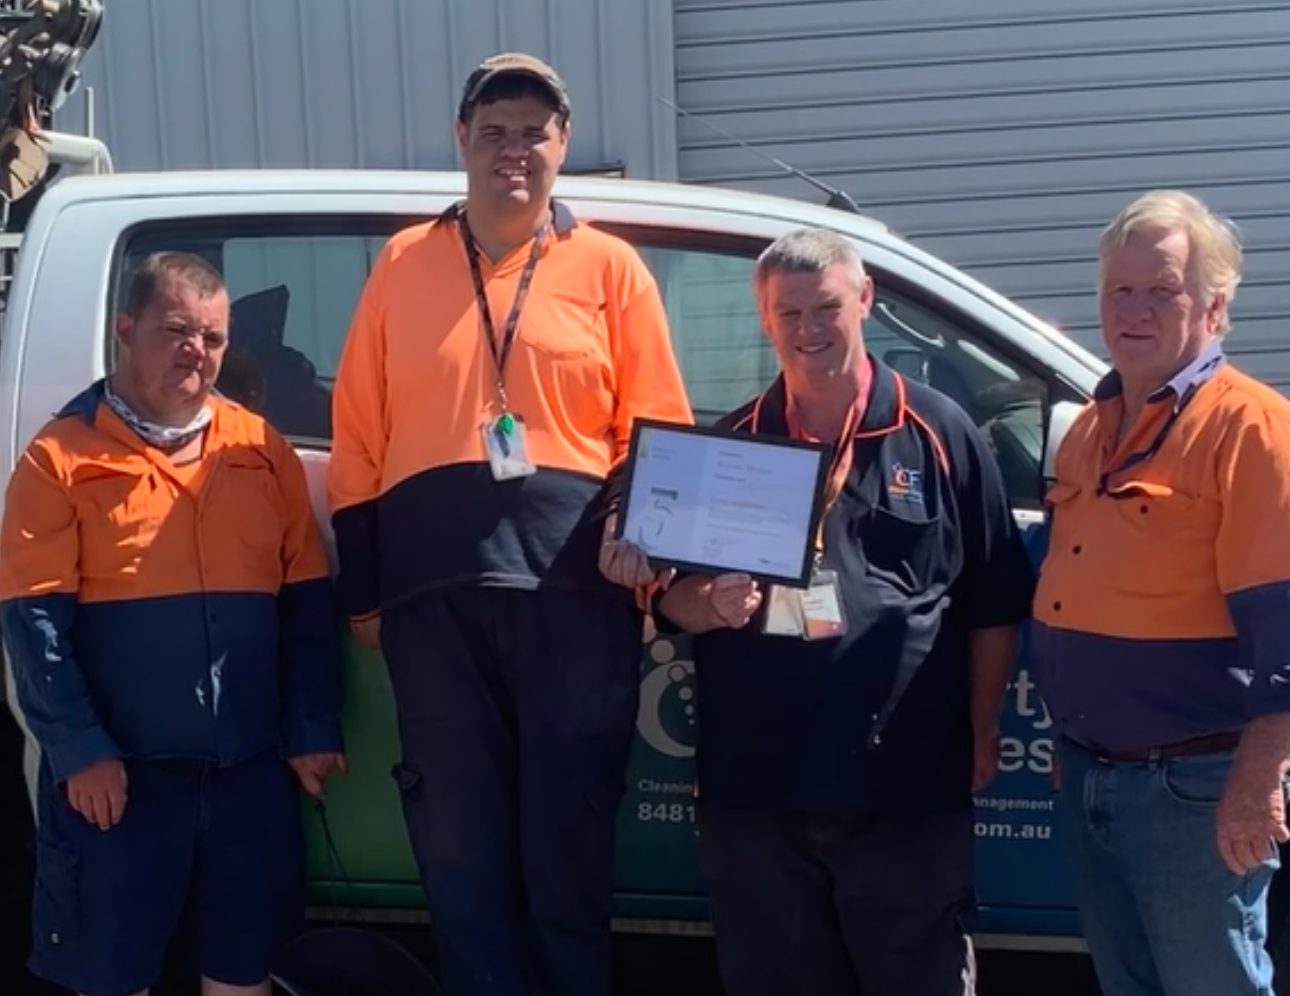 Four men standing in front of a van. One man is holding a certificate.